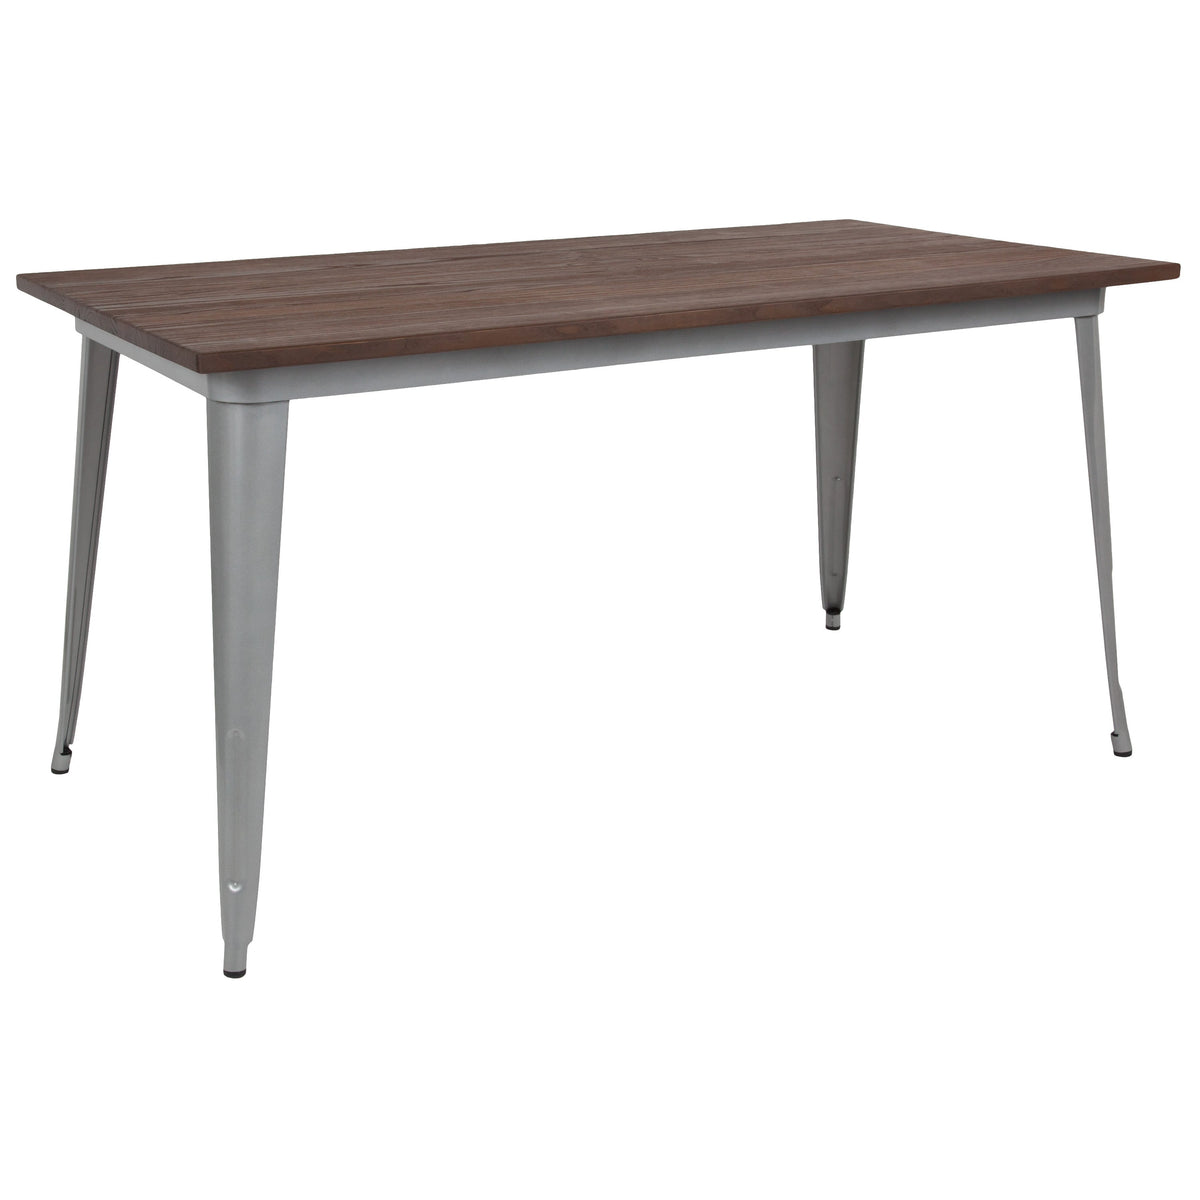 Silver |#| 30.25inch x 60inch Rectangular Silver Metal Indoor Table with Walnut Rustic Wood Top